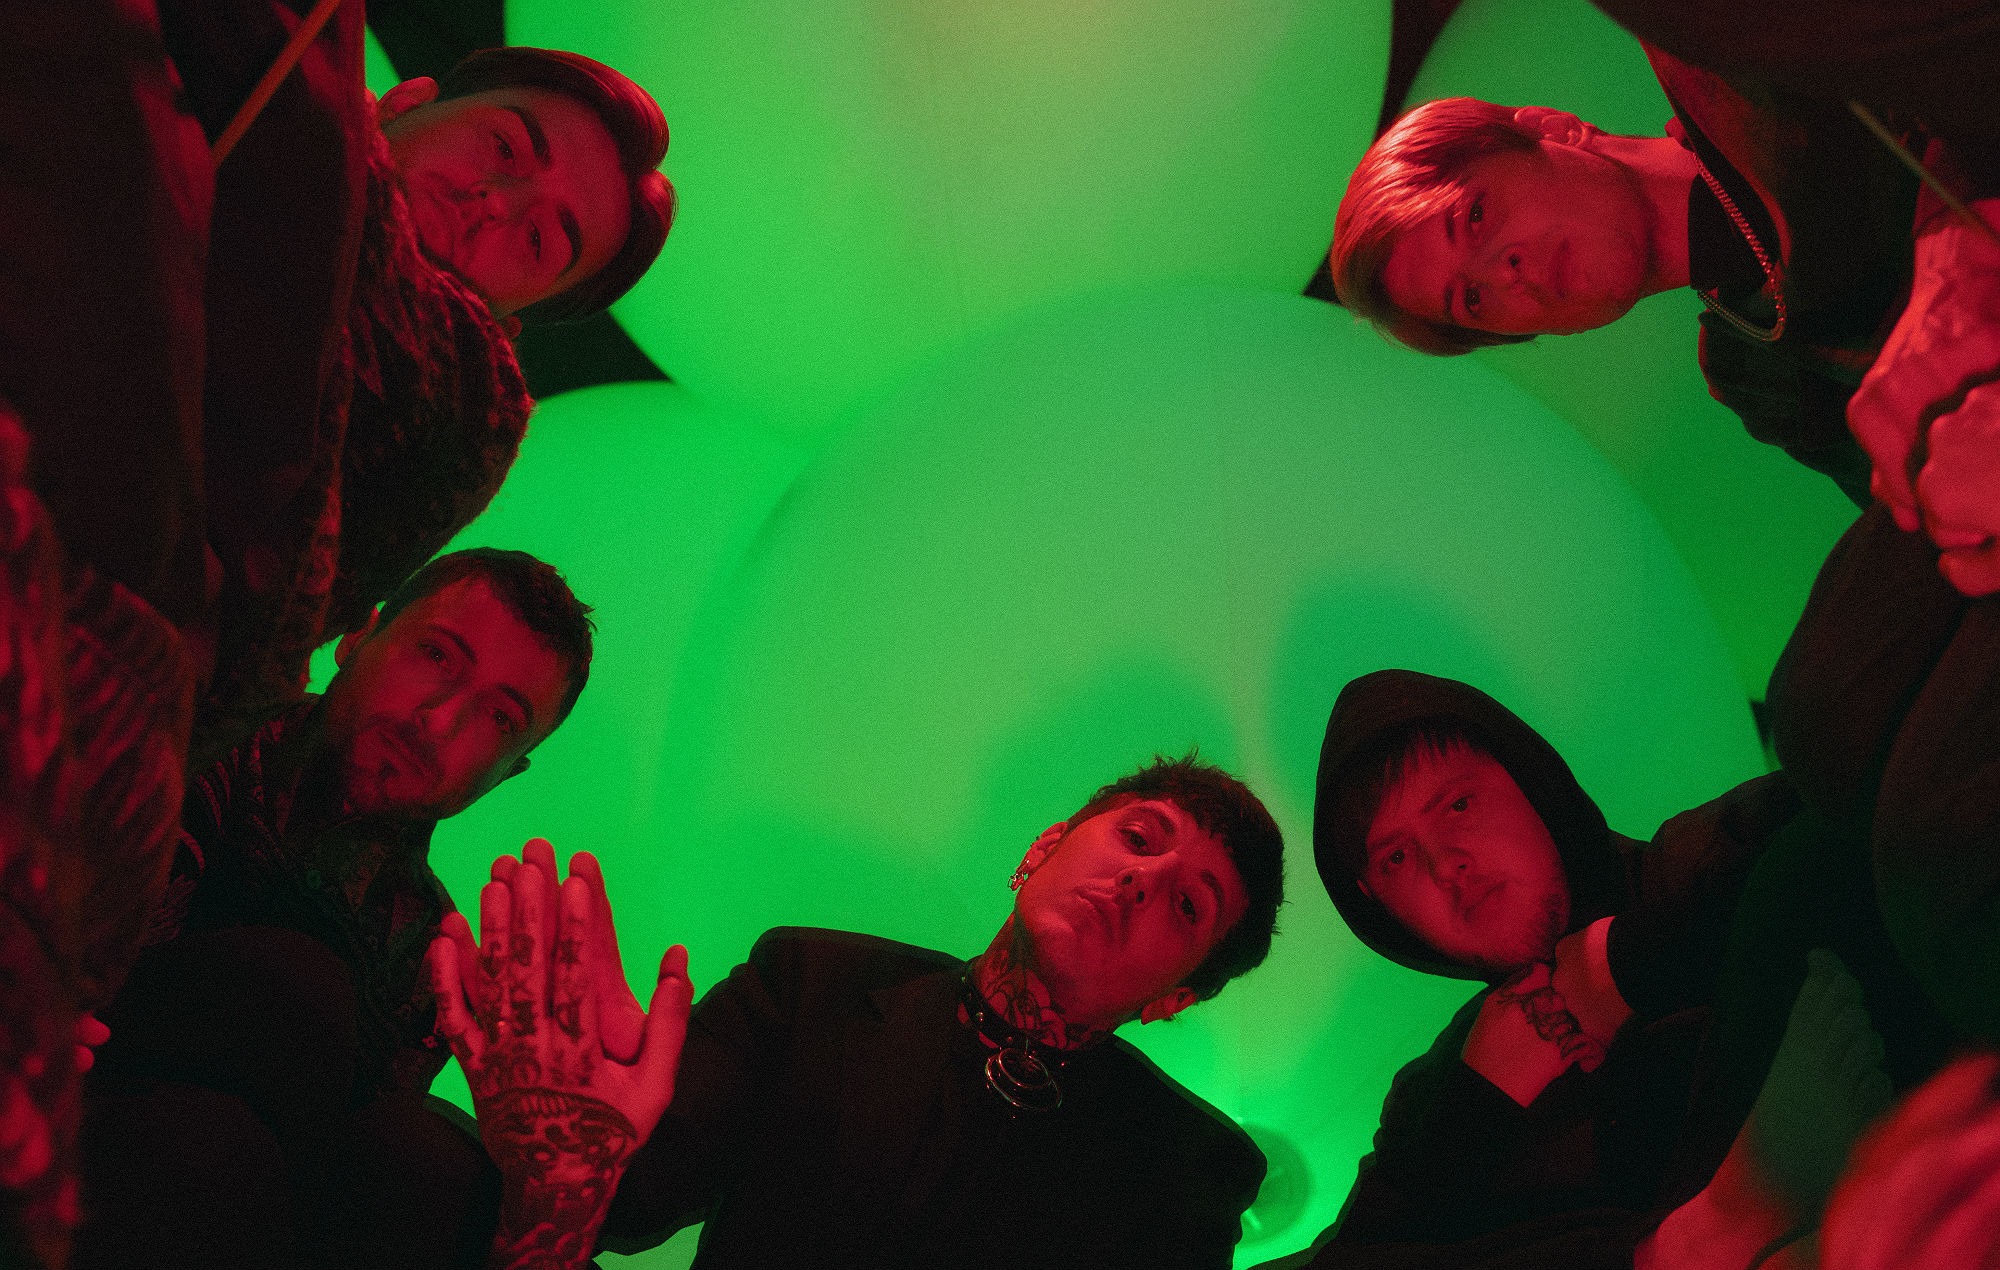 Bring Me The Horizon tell us about their new ‘survival horror song’ ‘Parasite Eve’ and ambitious ‘Post Human’ project